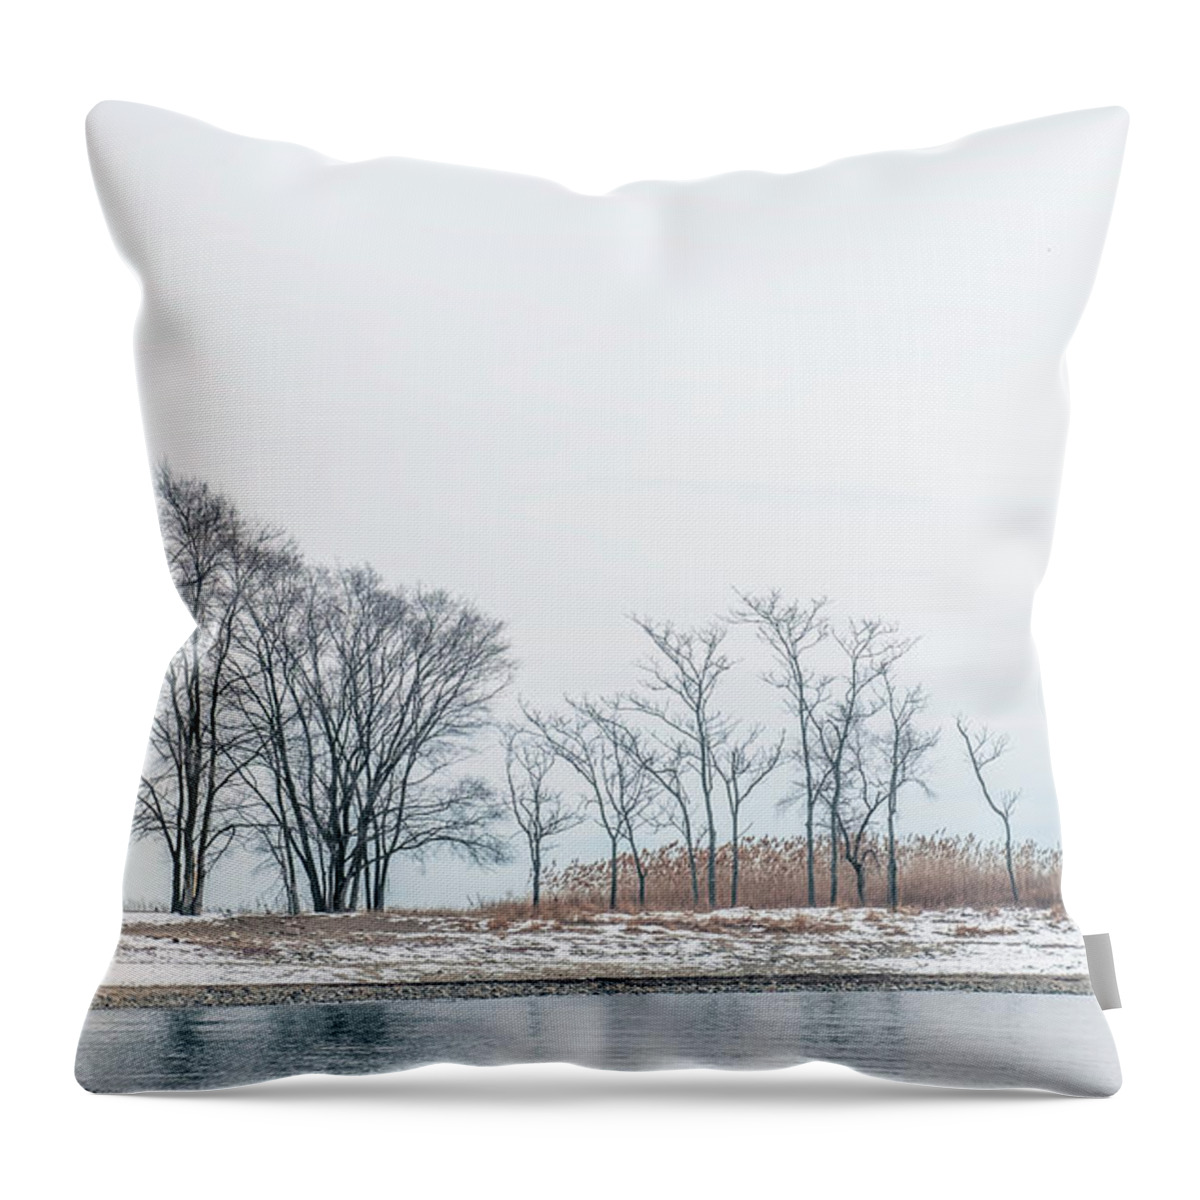 Island Throw Pillow featuring the photograph Alone by June Marie Sobrito